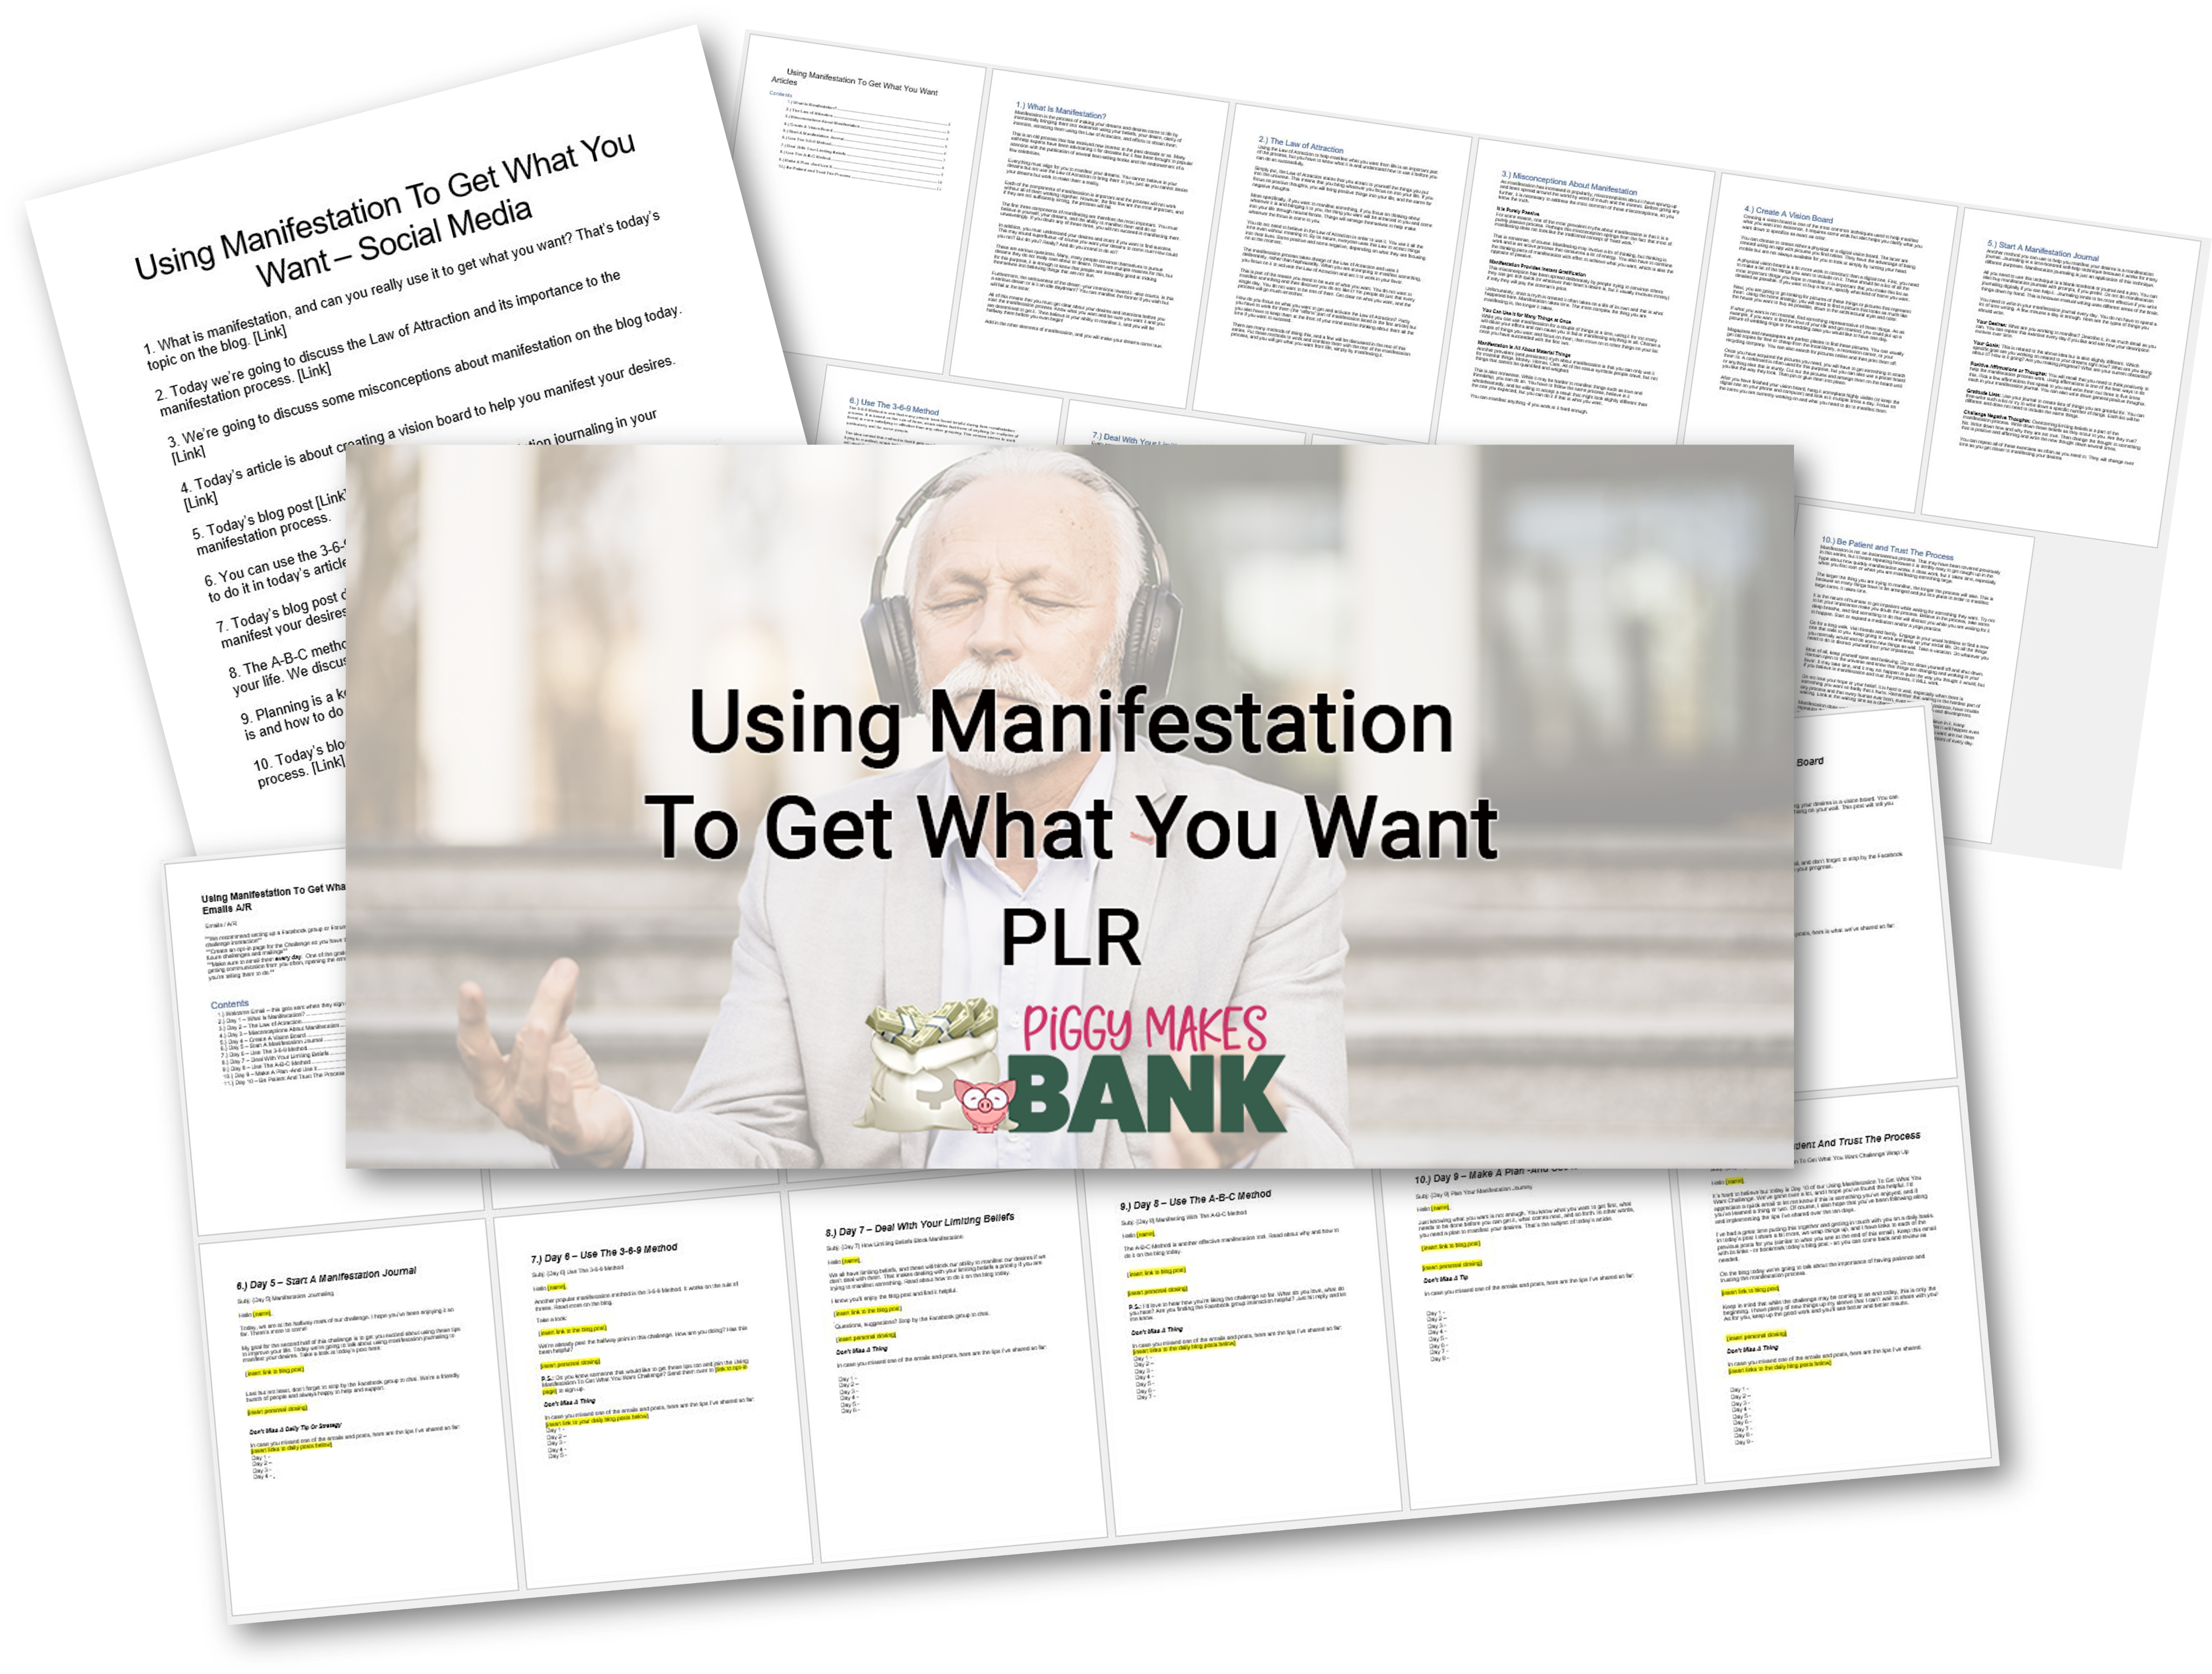 Using Manifestation To Get What You Want